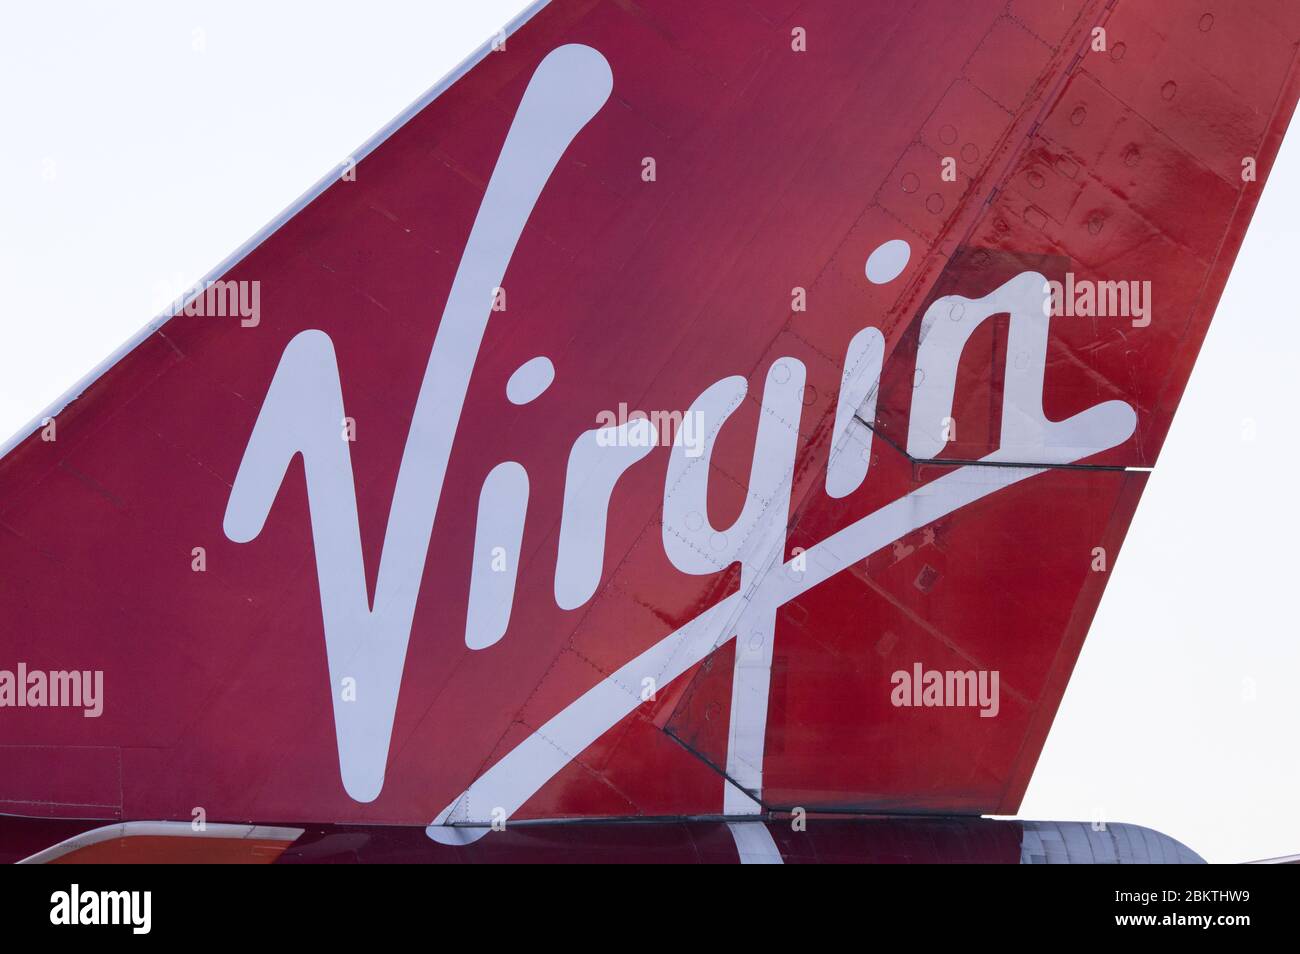 Glasgow, UK. 5th May, 2020. Pictured: Virgin Atlantic (Ruby Tuesday) Boeing 747-400 jumbo jet is grounded indefinitely at Glasgow Airport during the Coronavirus (COVID19) extended lockdown. Virgin Atlantic announced they will also keep their operations closed at Gatwick which will have massive knock on effects for other airlines and the south of England. Credit: Colin Fisher/Alamy Live News Stock Photo